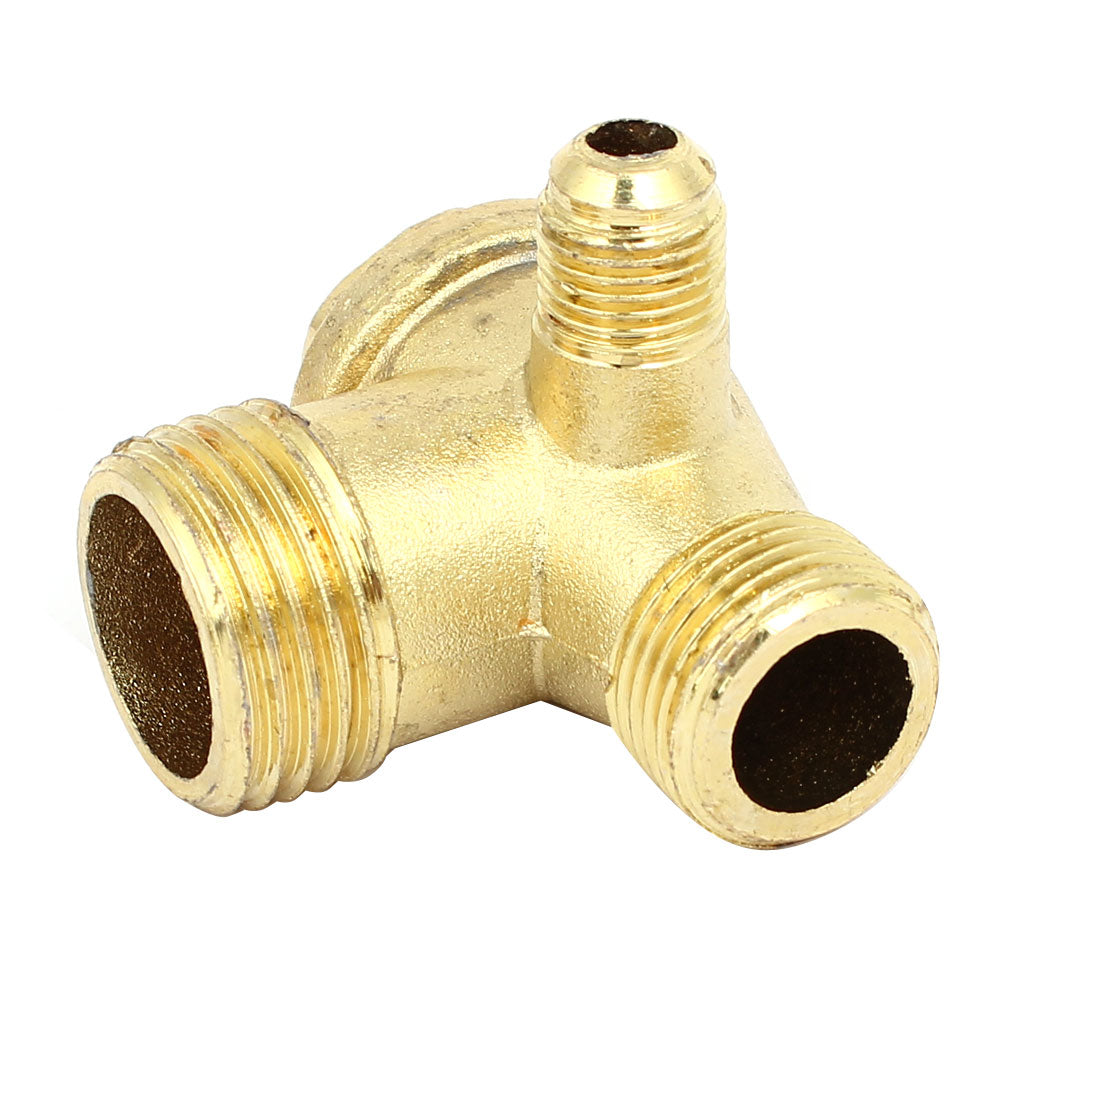 uxcell Uxcell G1/2xG3/8xG1/8 Male Thread 3-Way Vertical Air Compressor Fittings Check Valve